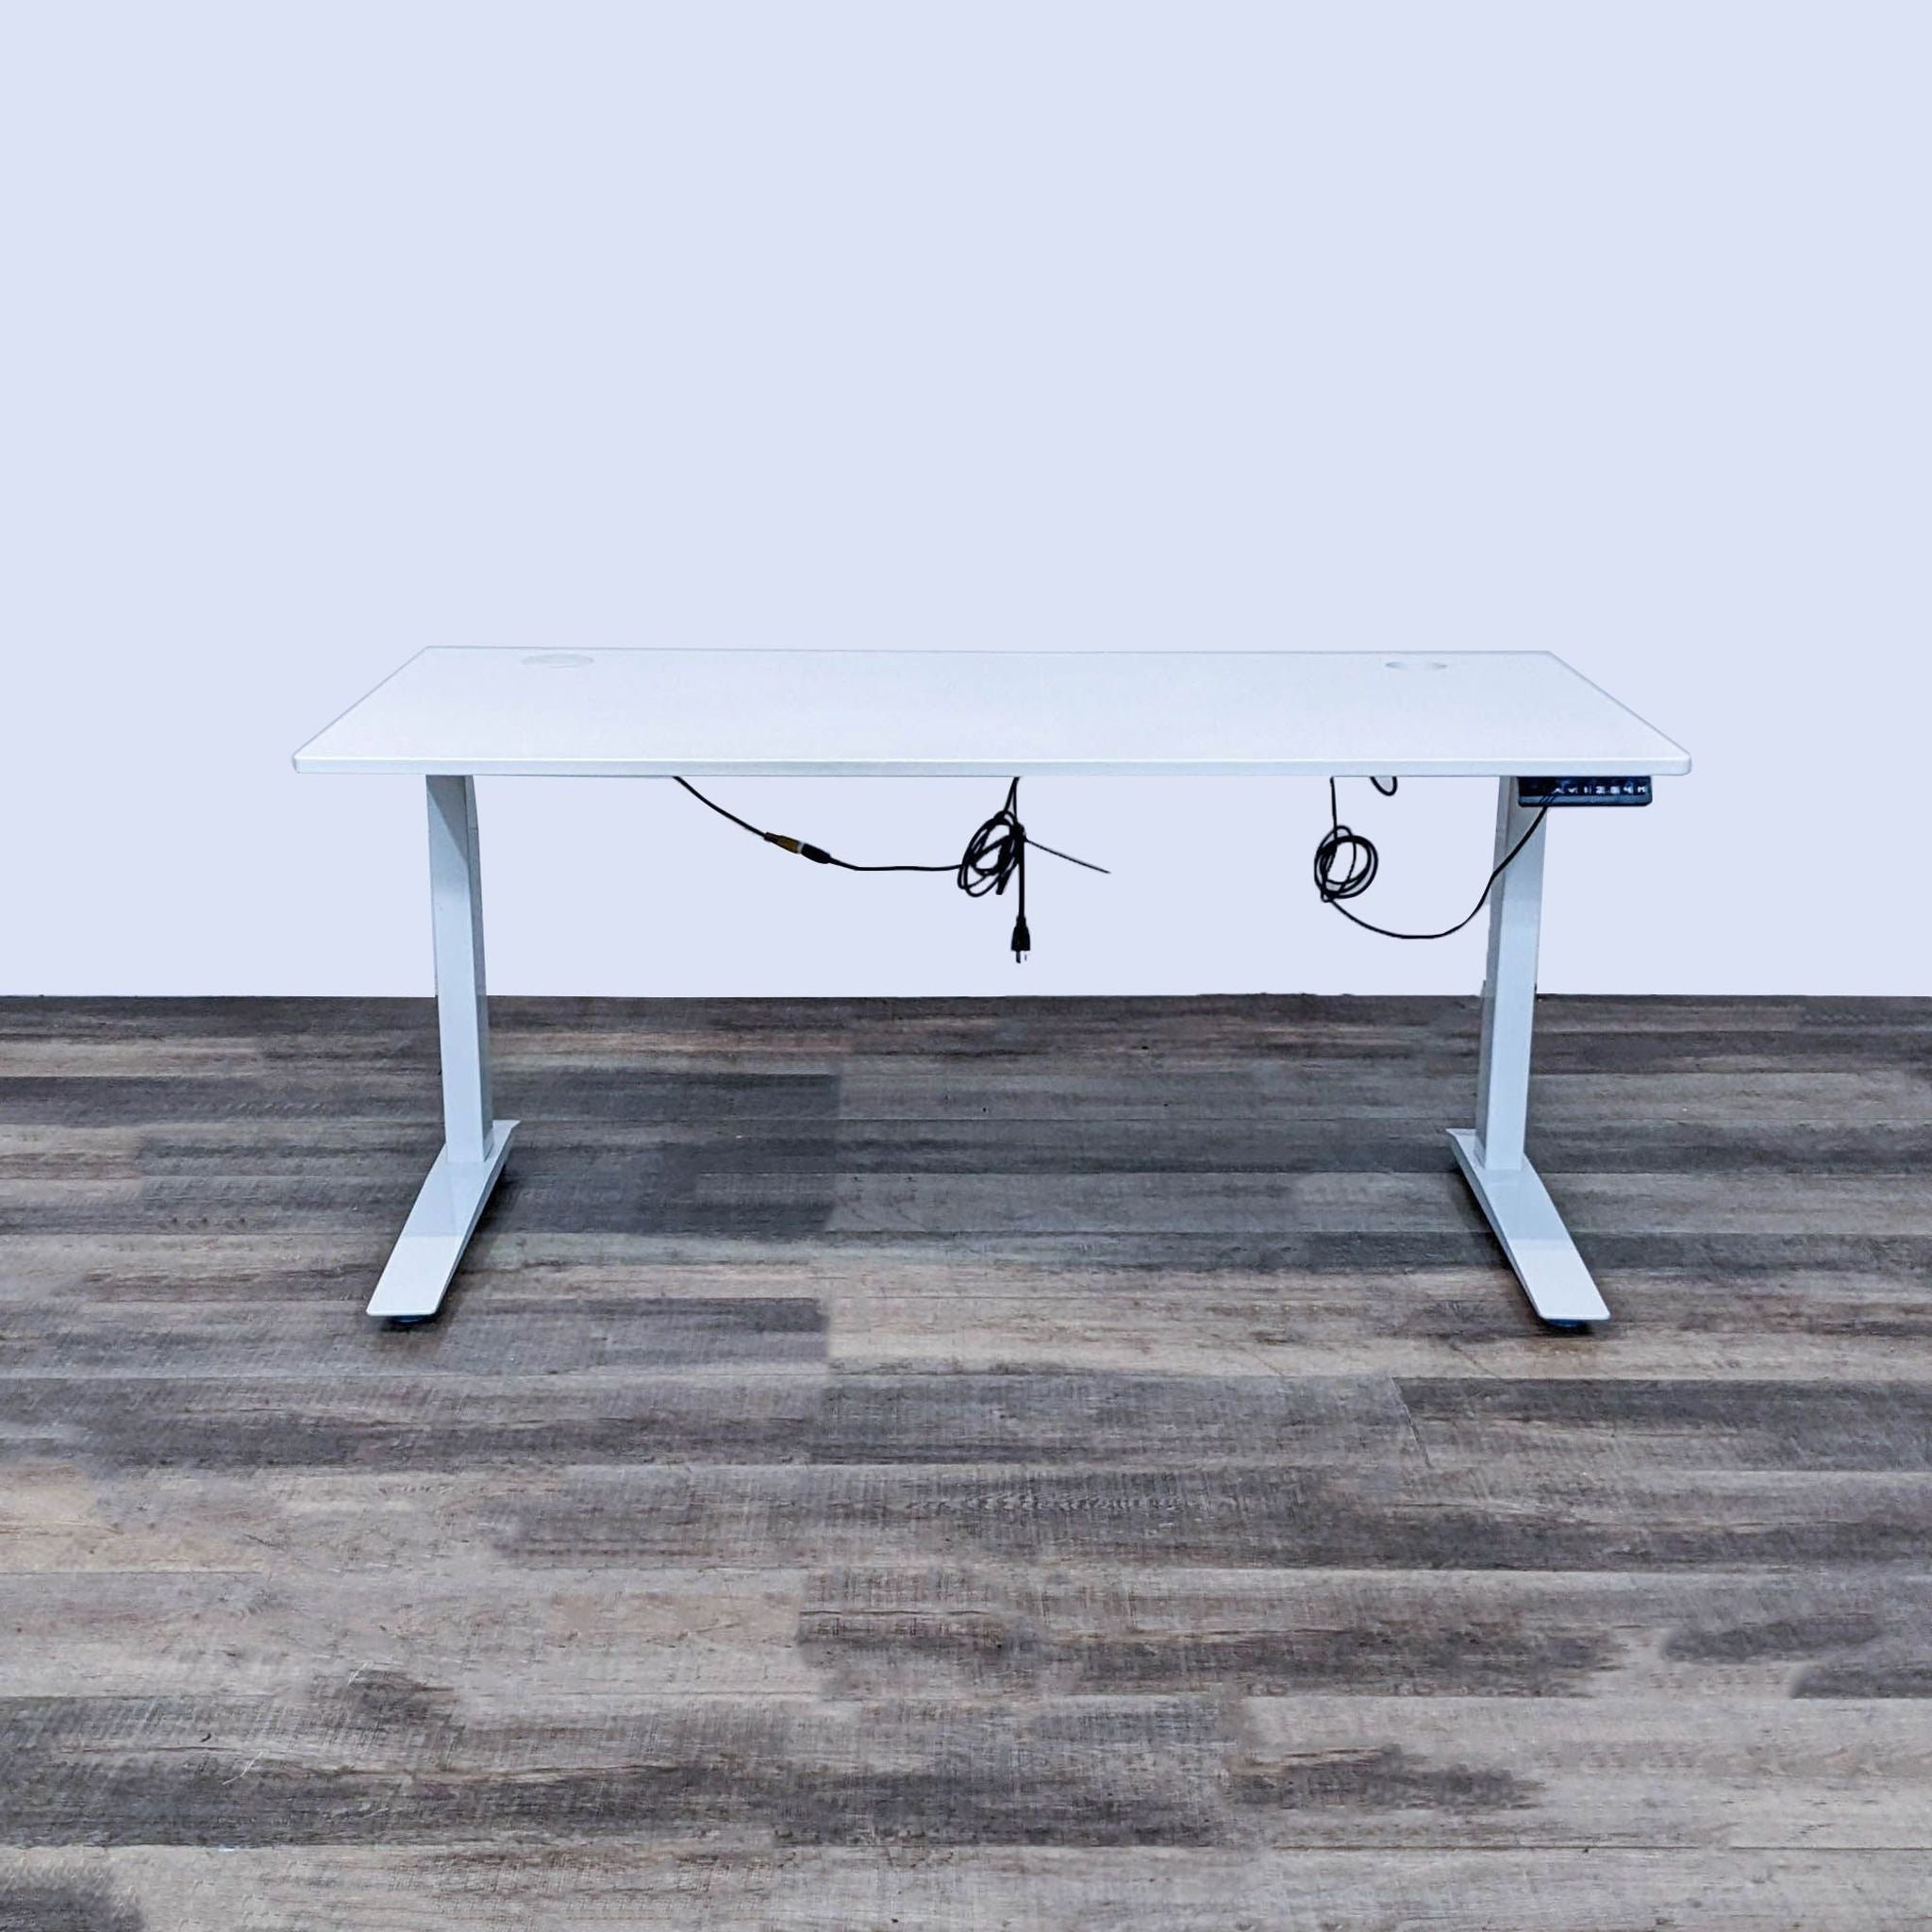 Reperch motorized white desk with height control on a steel frame, against a wooden floor and plain background.